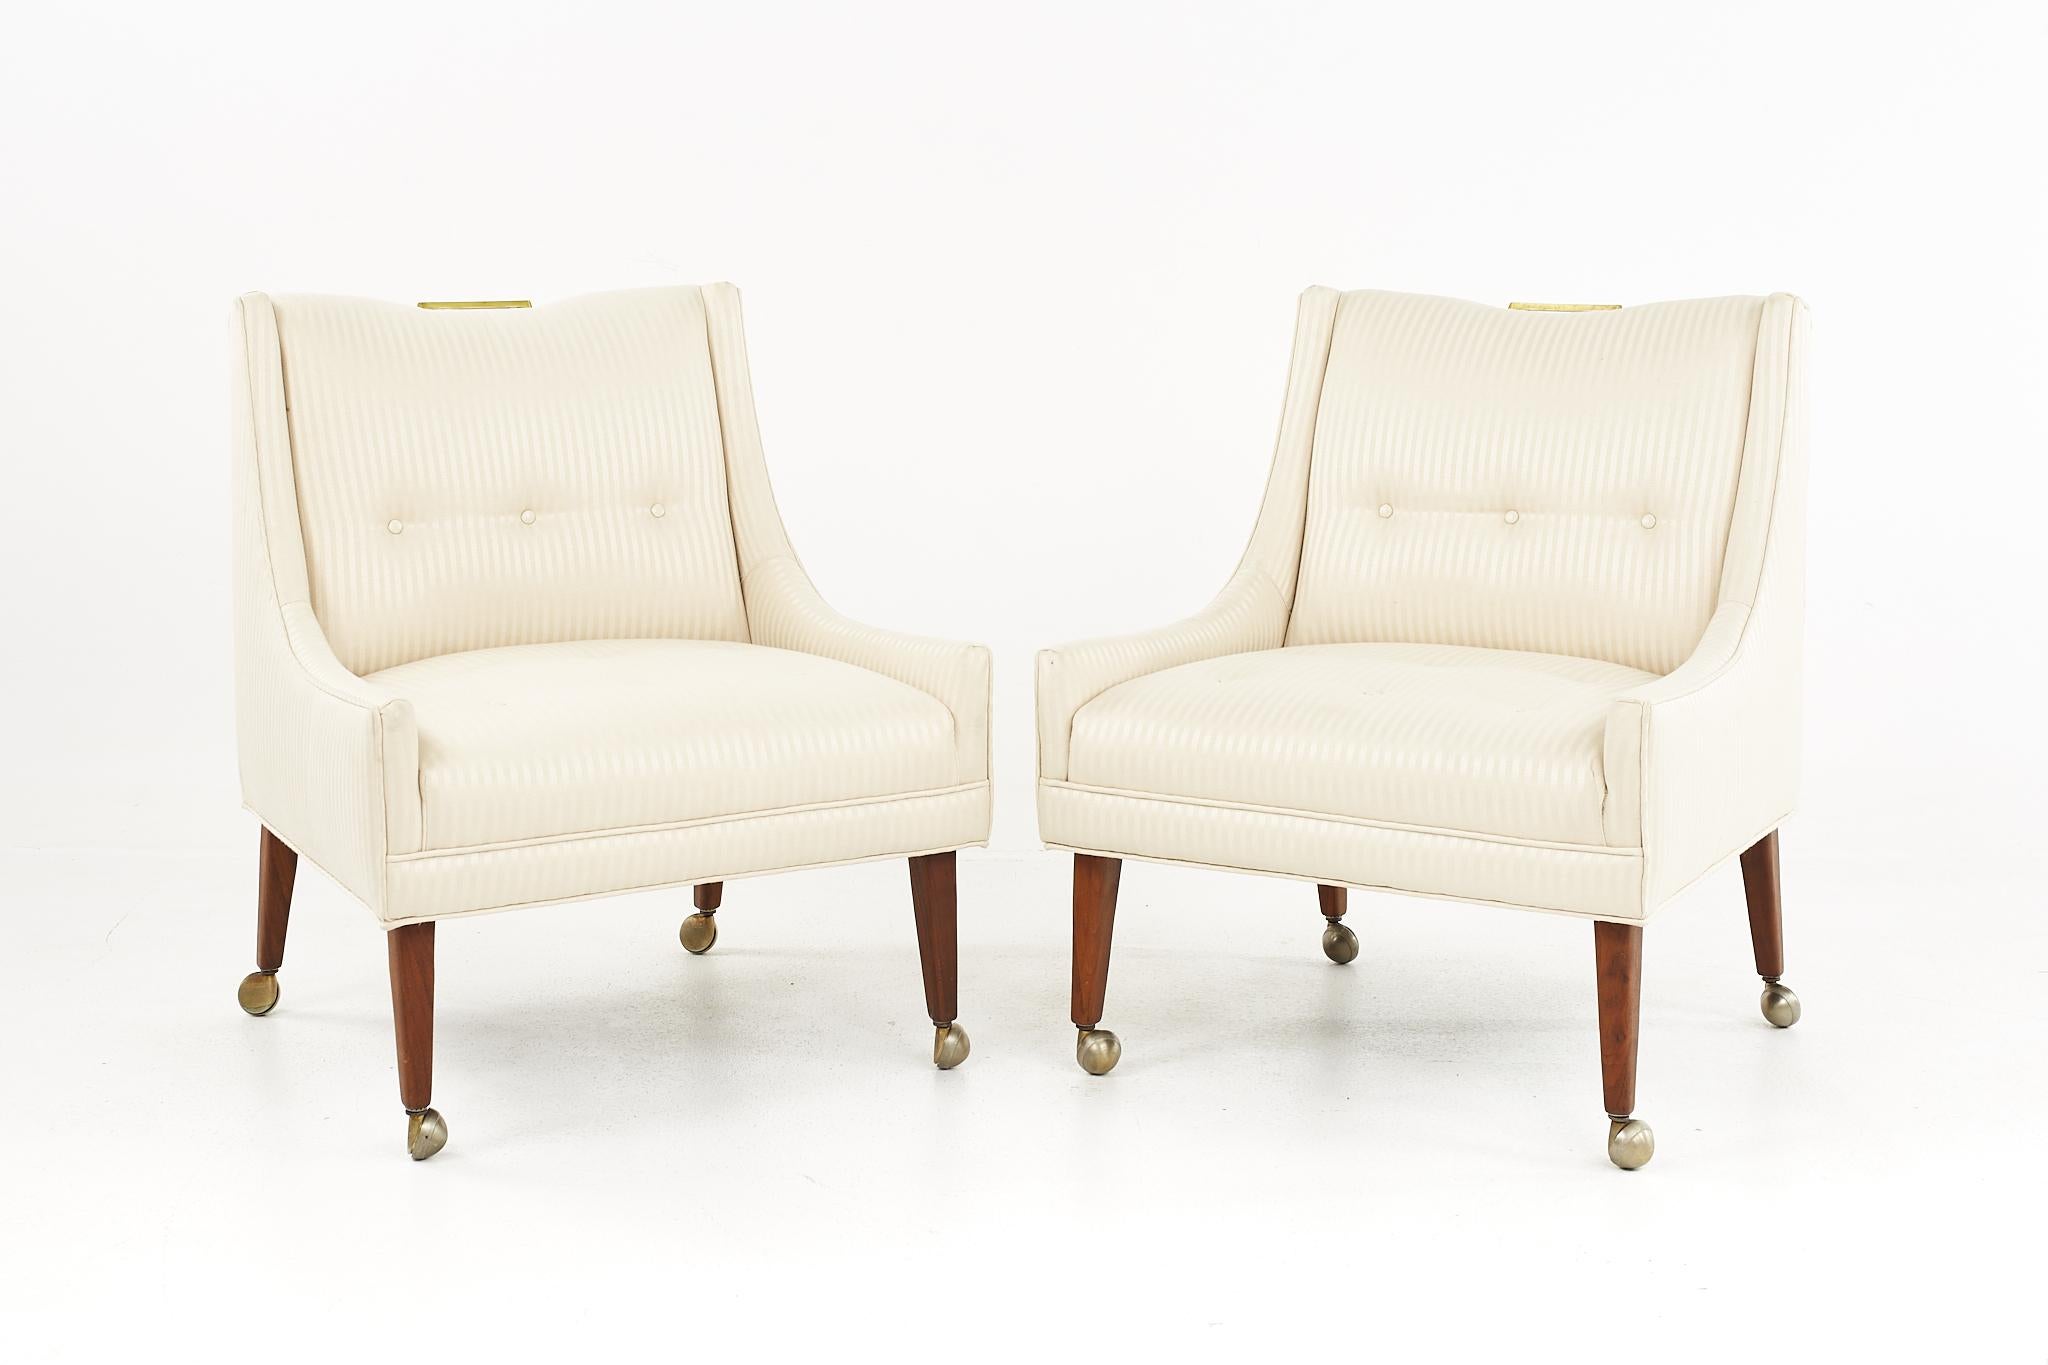 Harvey Probber style mid century lounge chairs - a pair

Each chair measures: 24 wide x 23.5 deep x 30 high, with a seat height of 15 inches and arm height of 16.5 inches 

All pieces of furniture can be had in what we call restored vintage